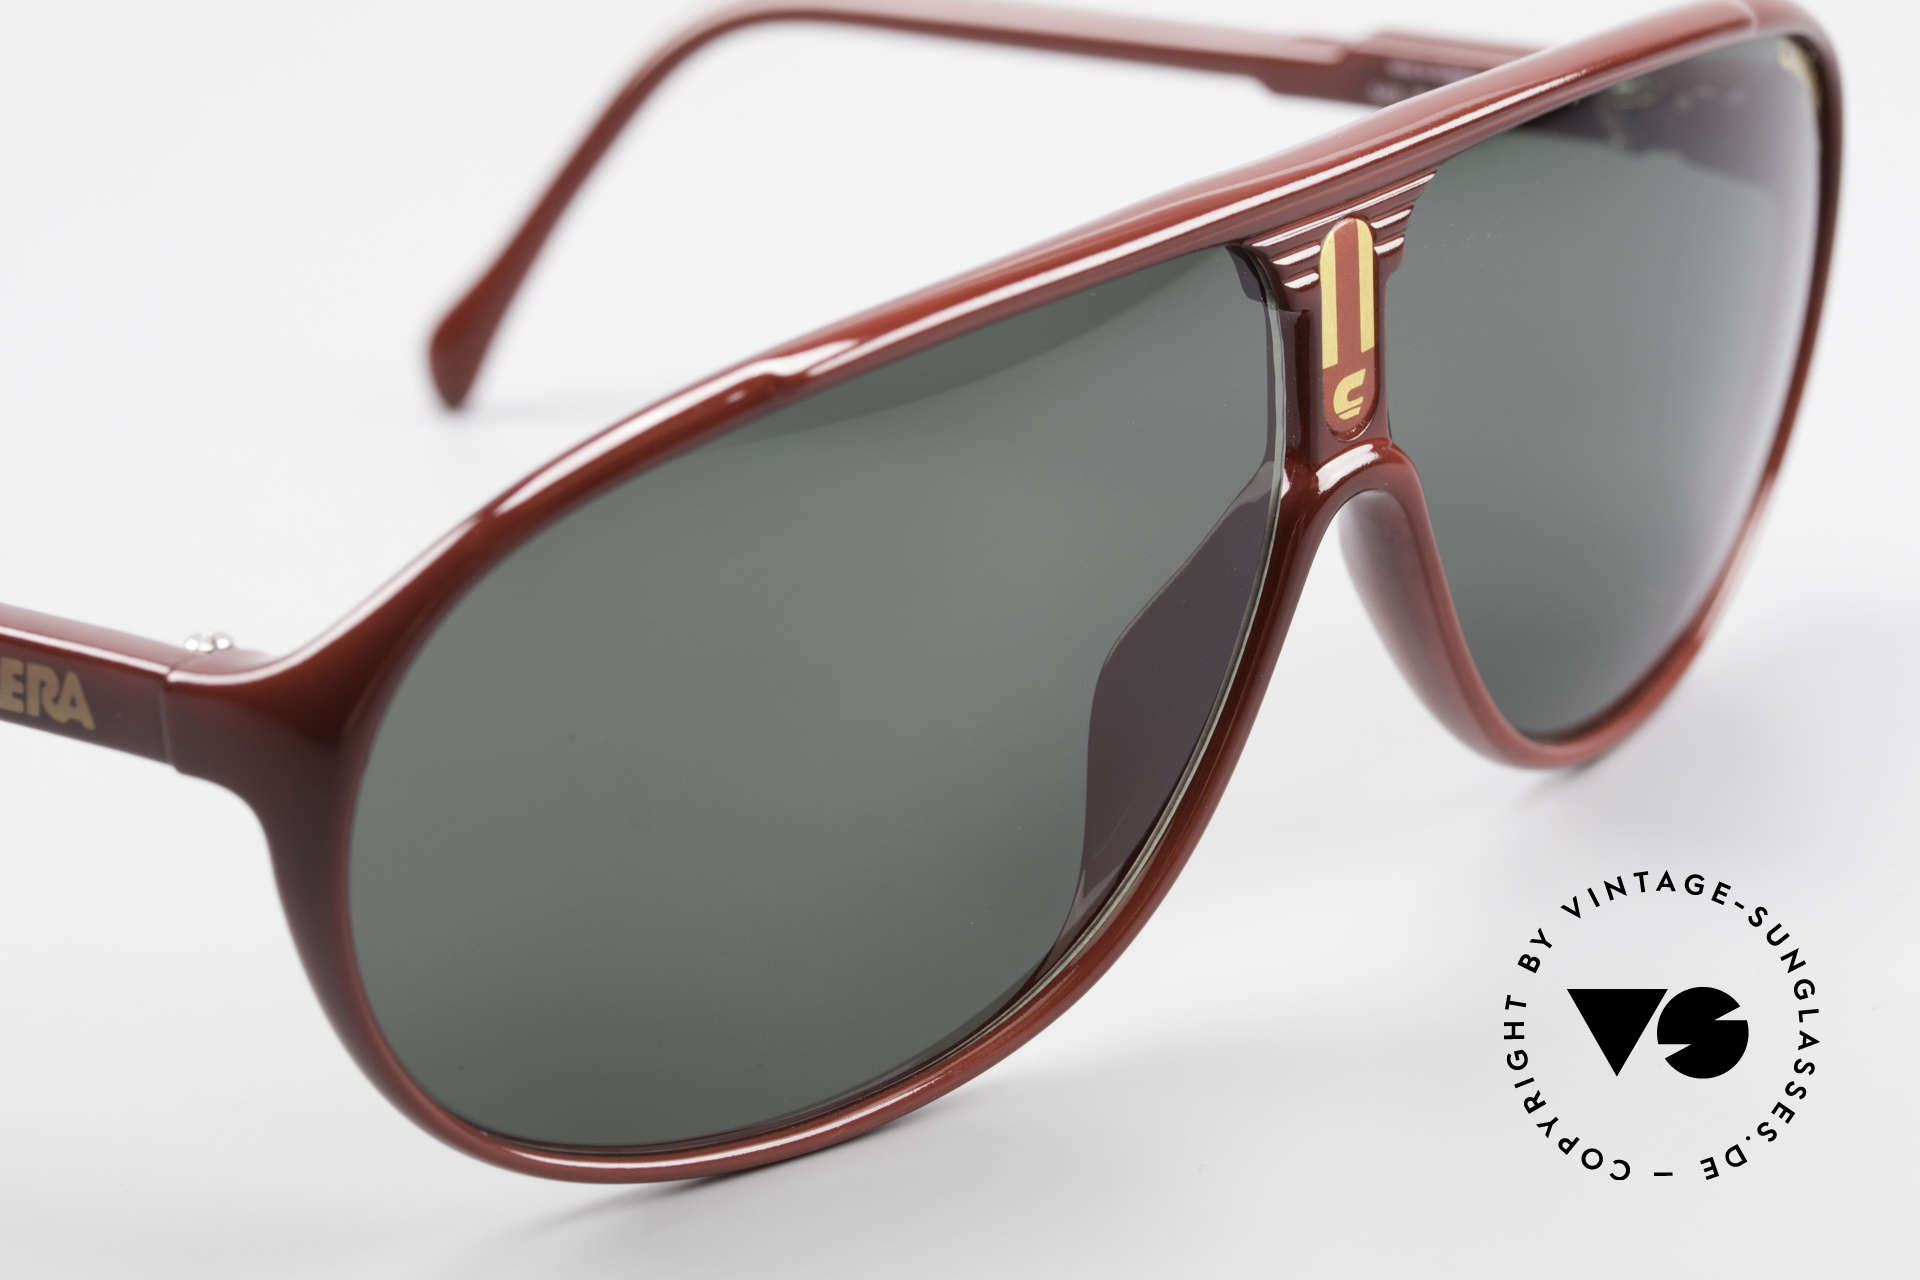 Carrera 5412 3 Sets Of Different Sun Lenses, green and brown Ultrasight and brown-gradient C-Vision, Made for Men and Women